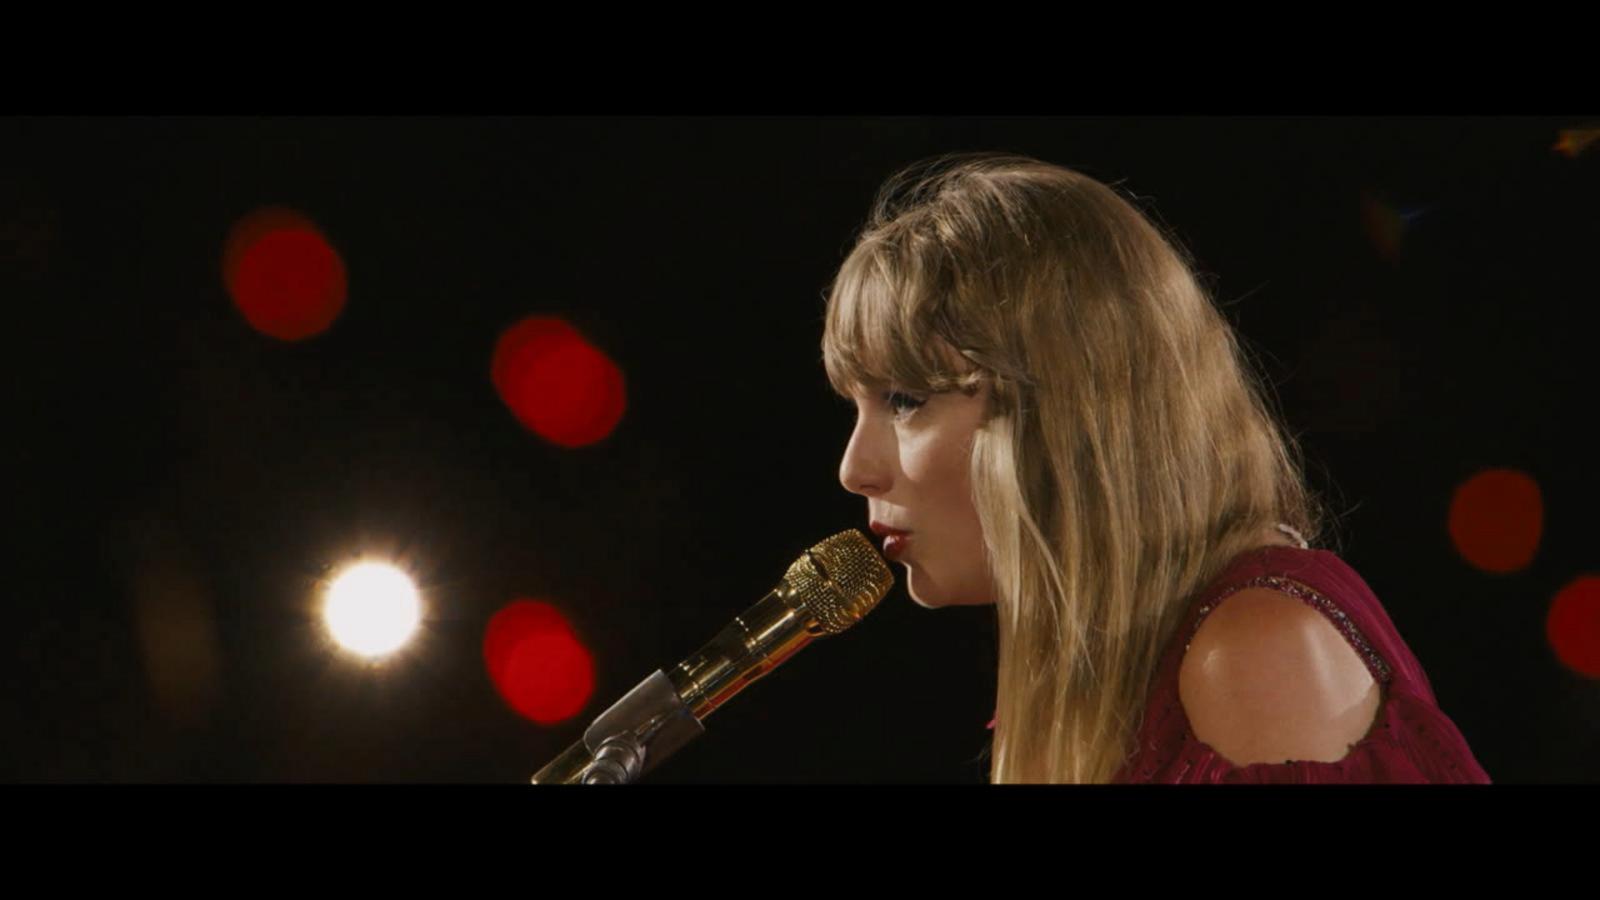 VIDEO: Acoustic song announced for Taylor Swift’s Disney+ concert film